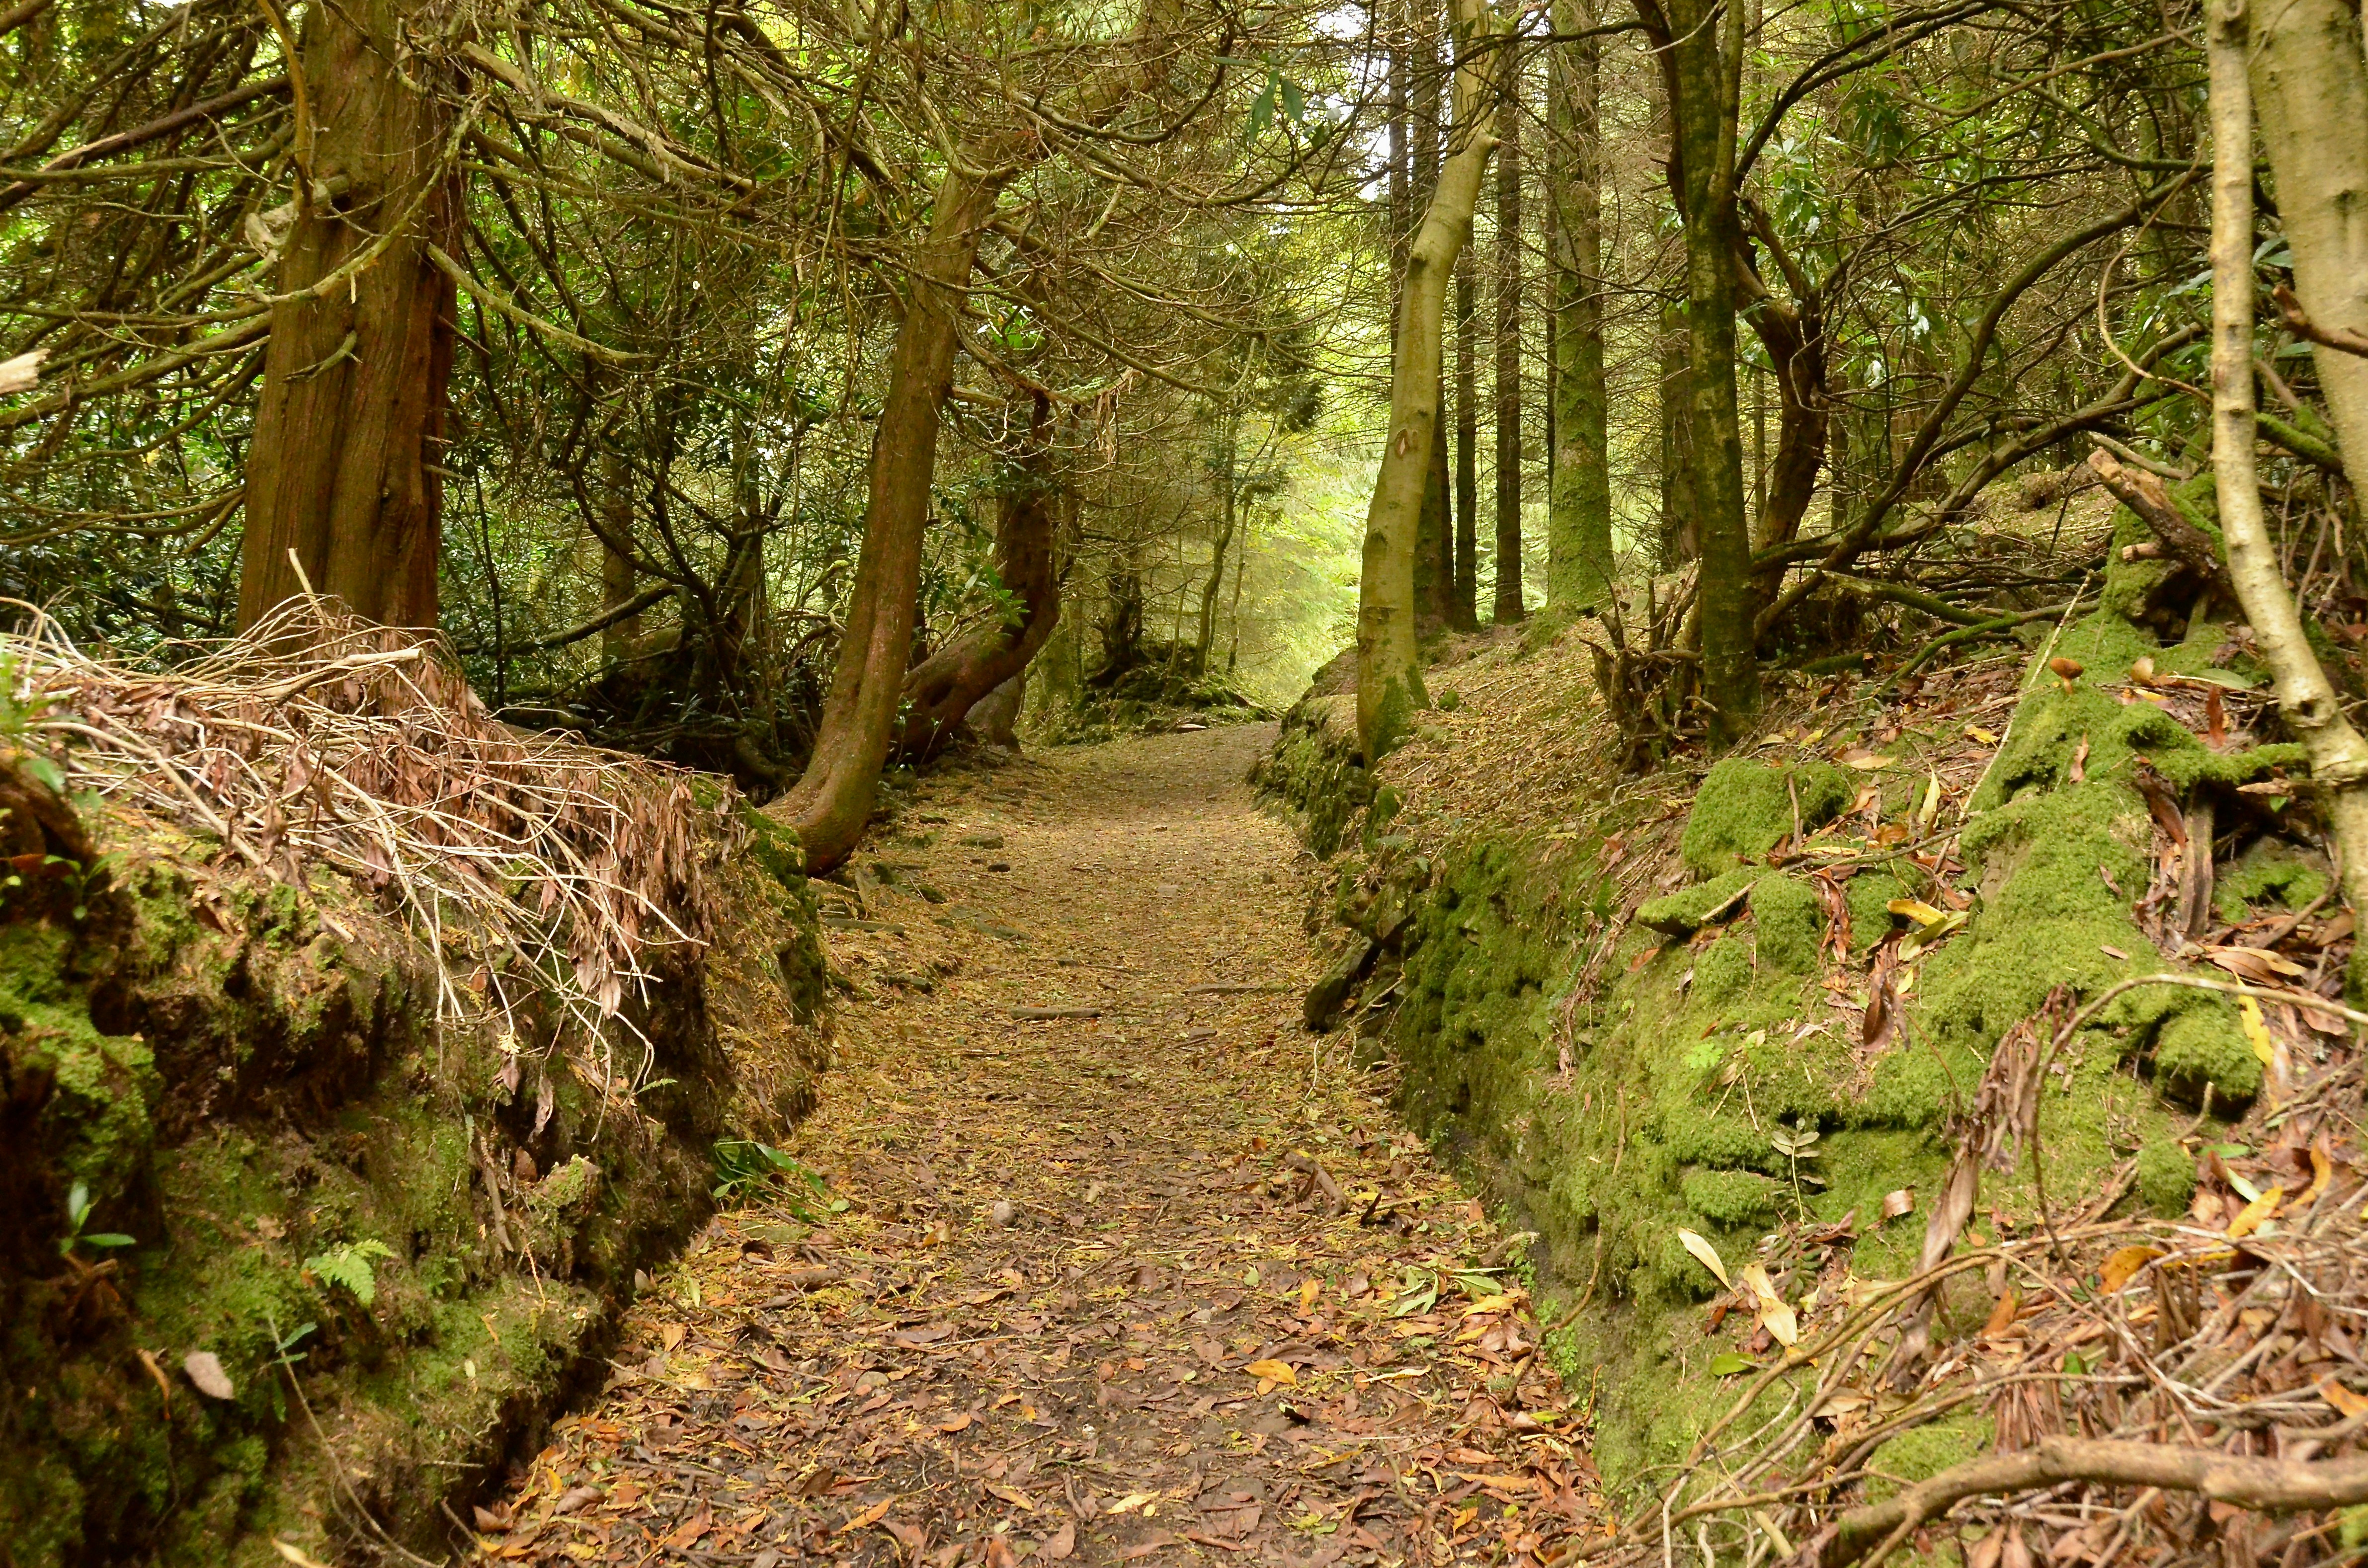 Mossy and leafy forest floor in Slieve Bloom Mountains.